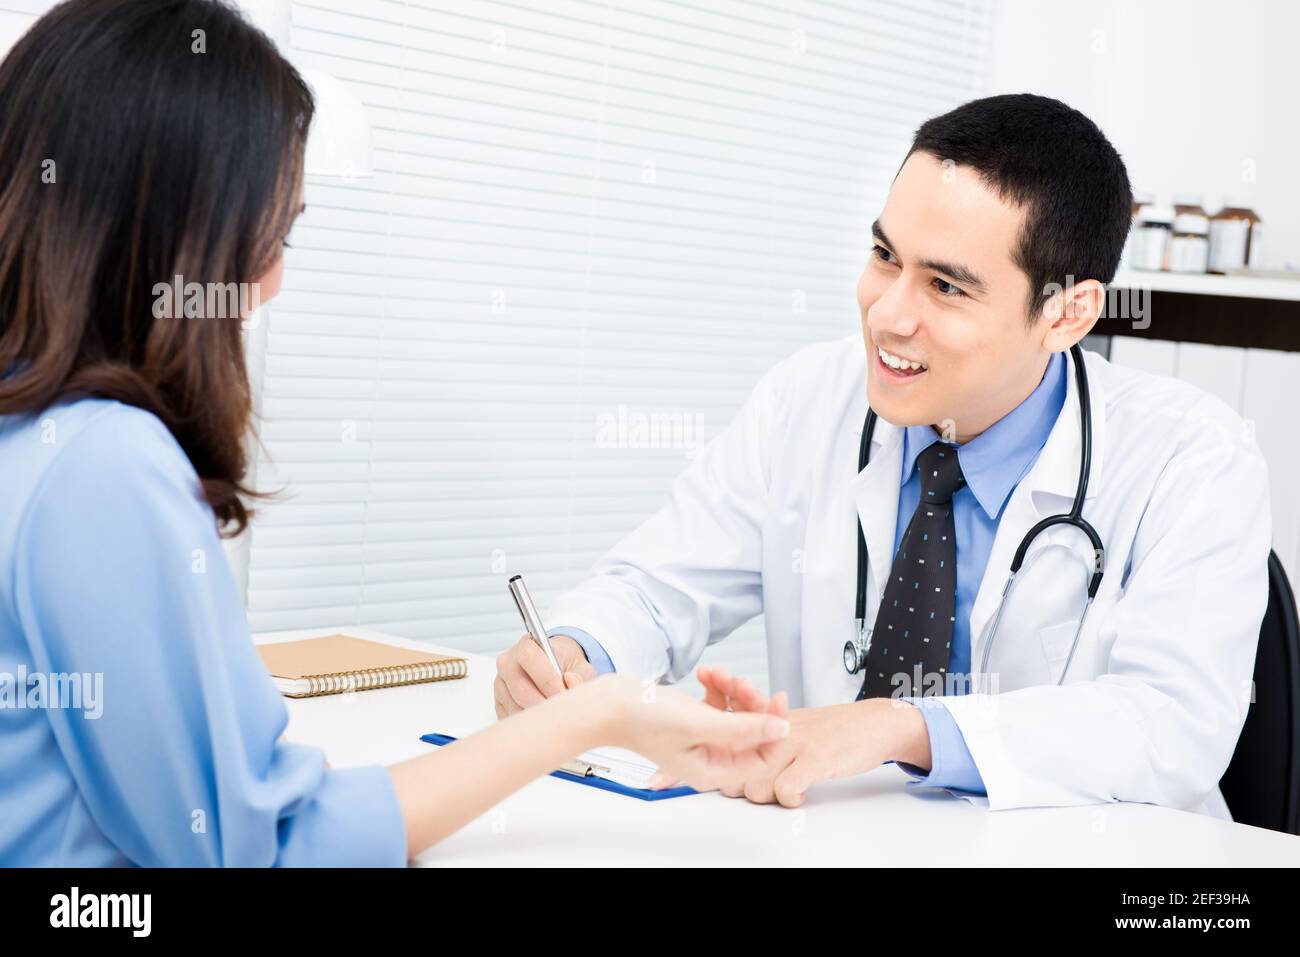 Doctor asking some information from female patient Stock Photo